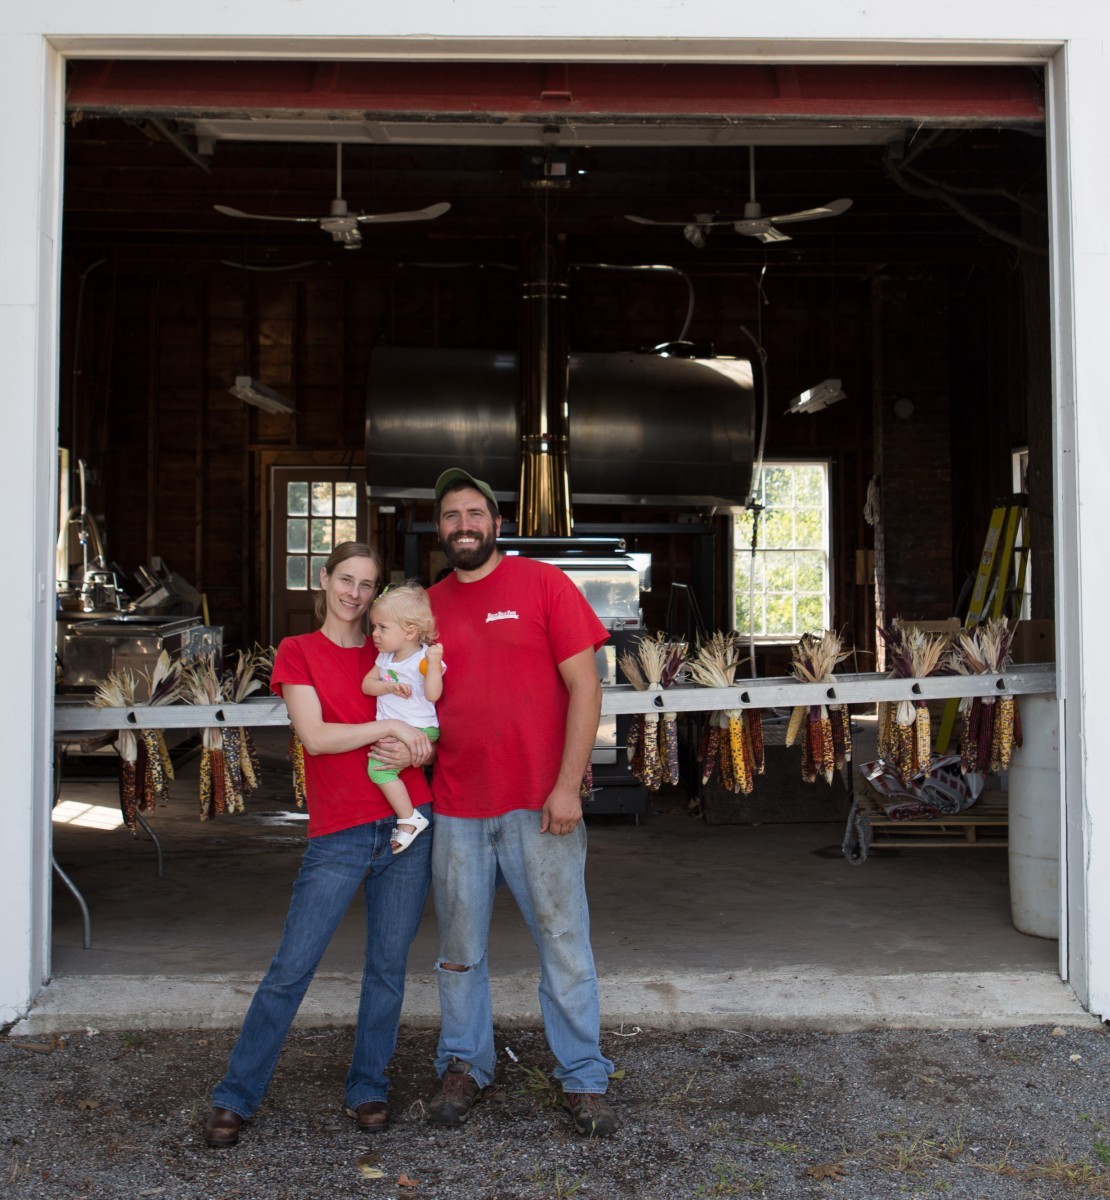 a smiling man and woman in red T-shirts, holding a small girl, stand in front of the entrance to a large barn where multi-colored ears of corn are hanging on a rack